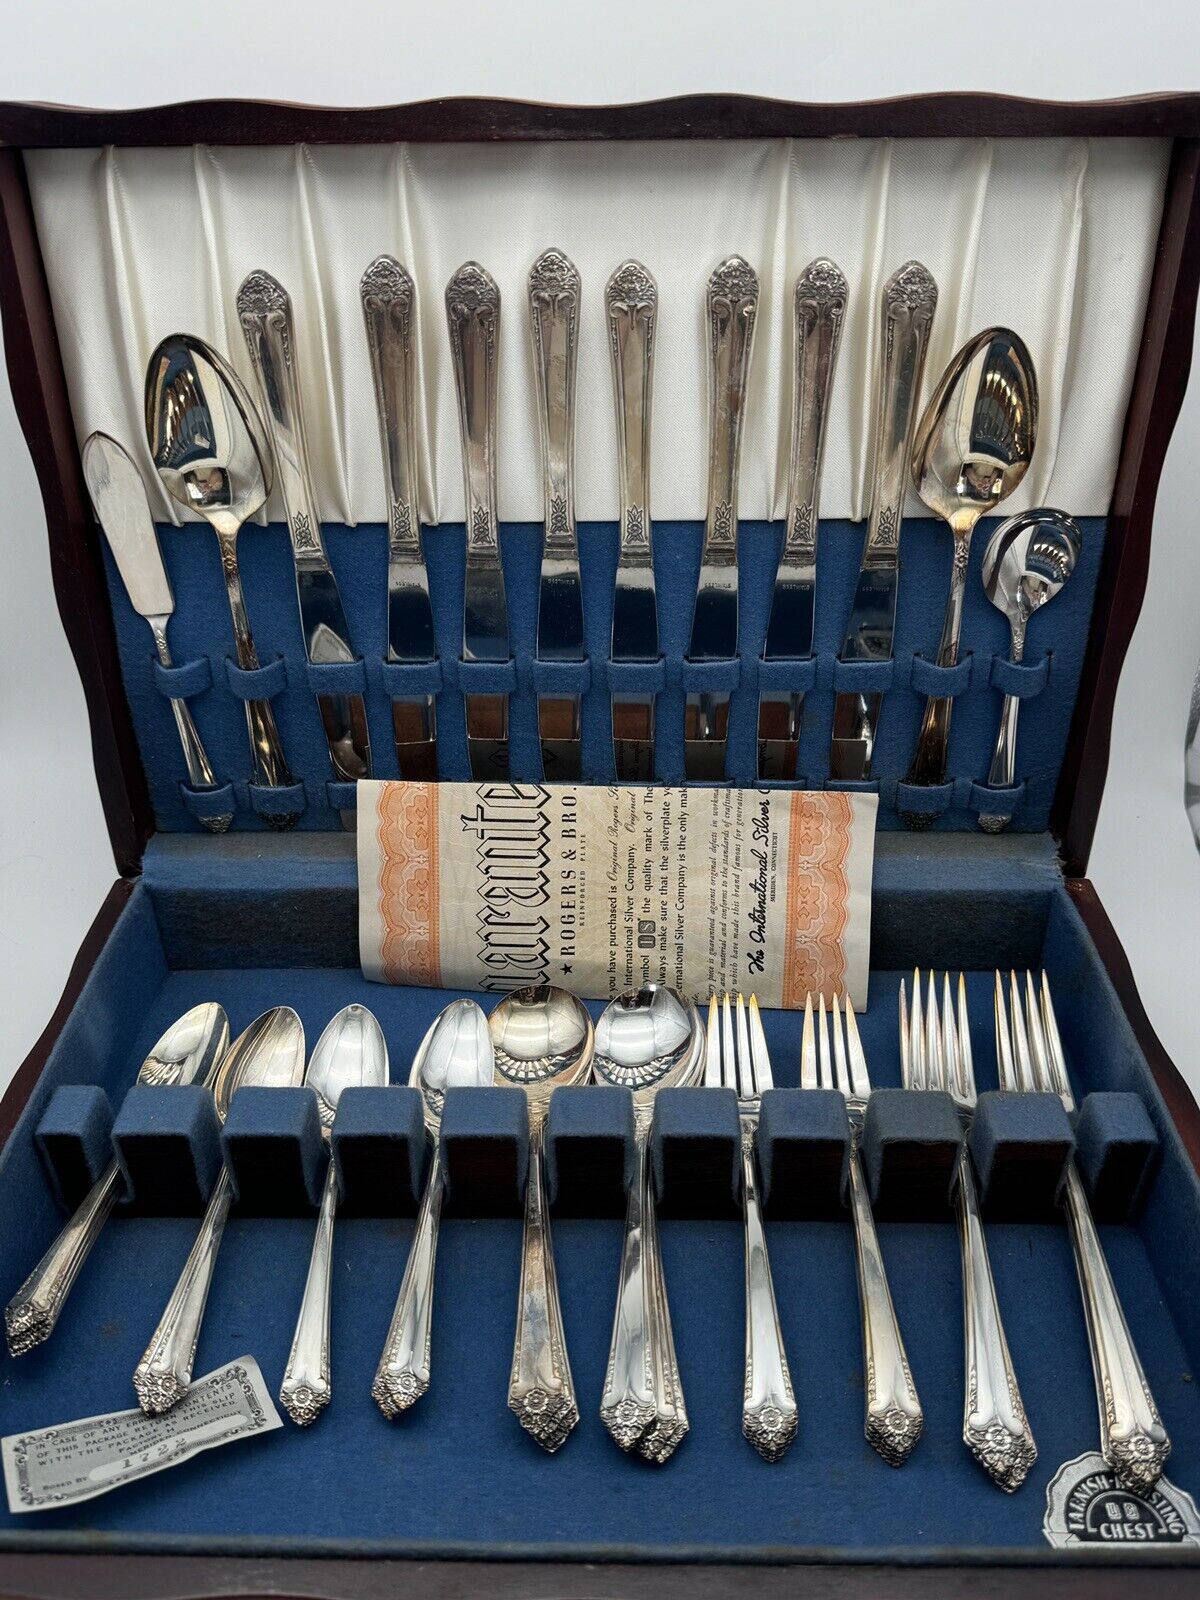 52 Pcs Roger’s Bros STARLIGHT 1950 Silverware Set For 8 In Wood Chest